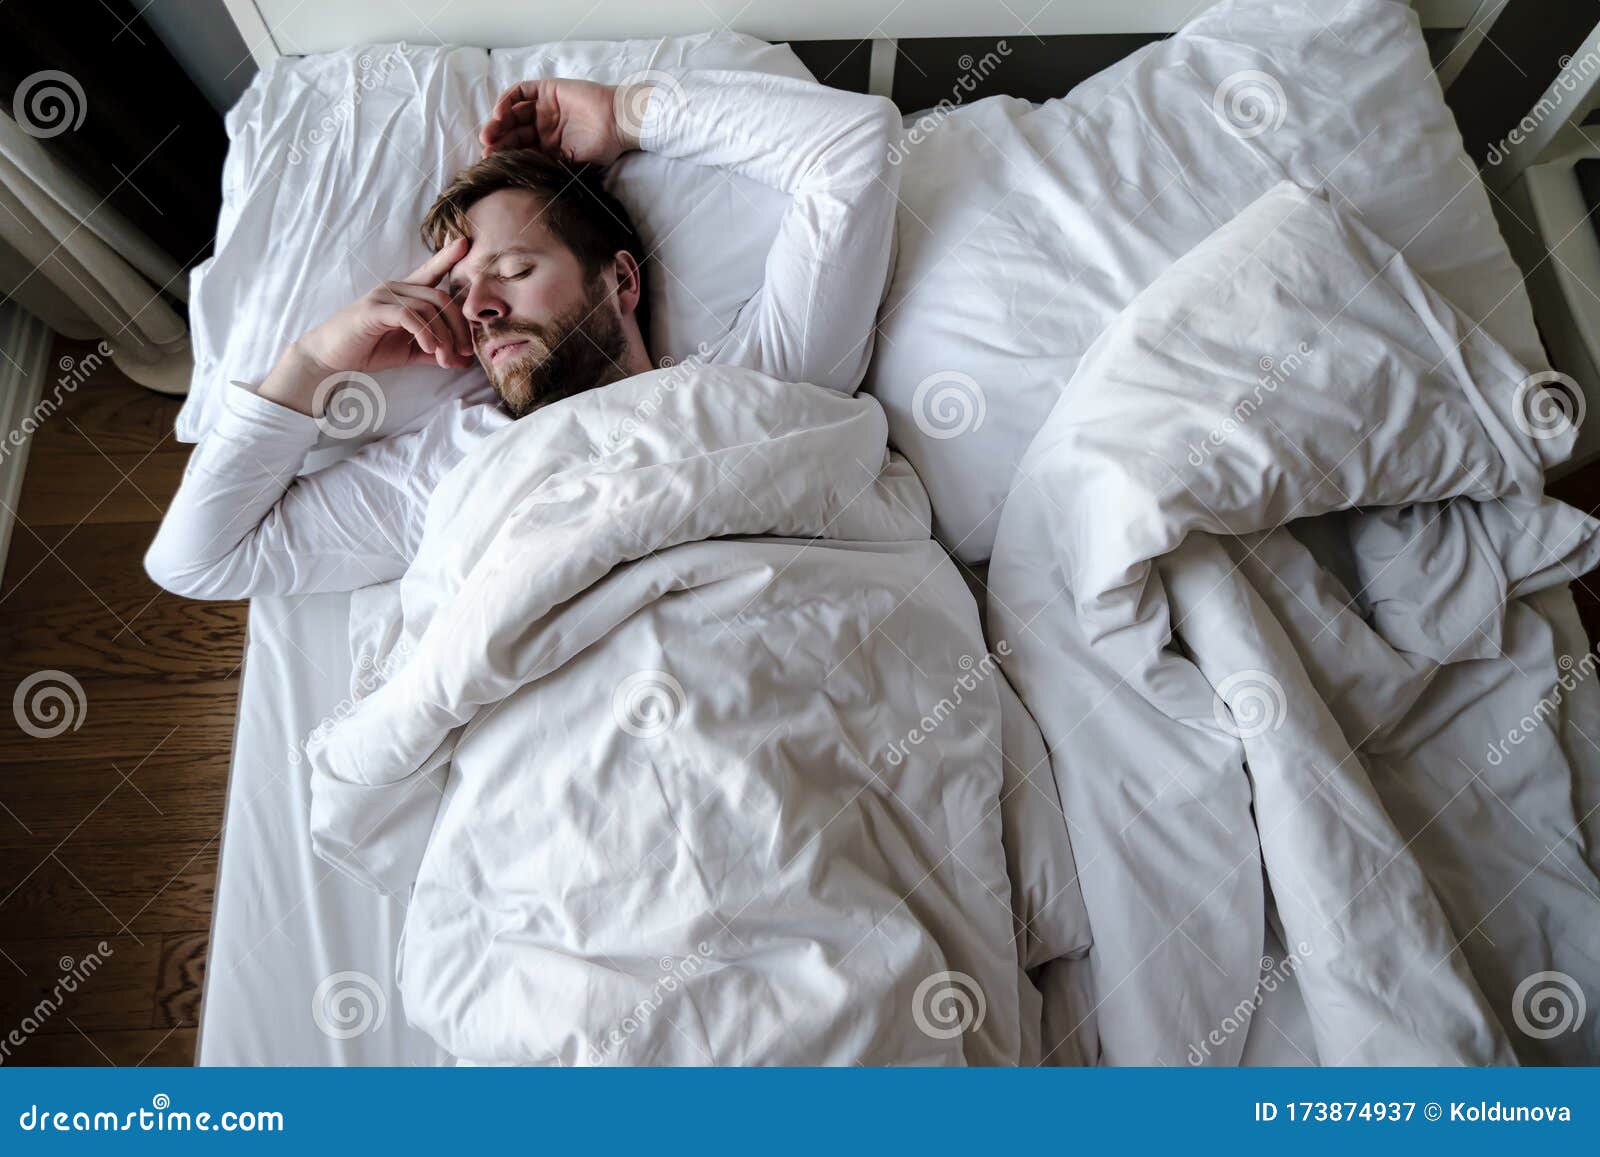 bearded man sleeps restlessly in bed, he is alarmed and had a terrible nightmare.